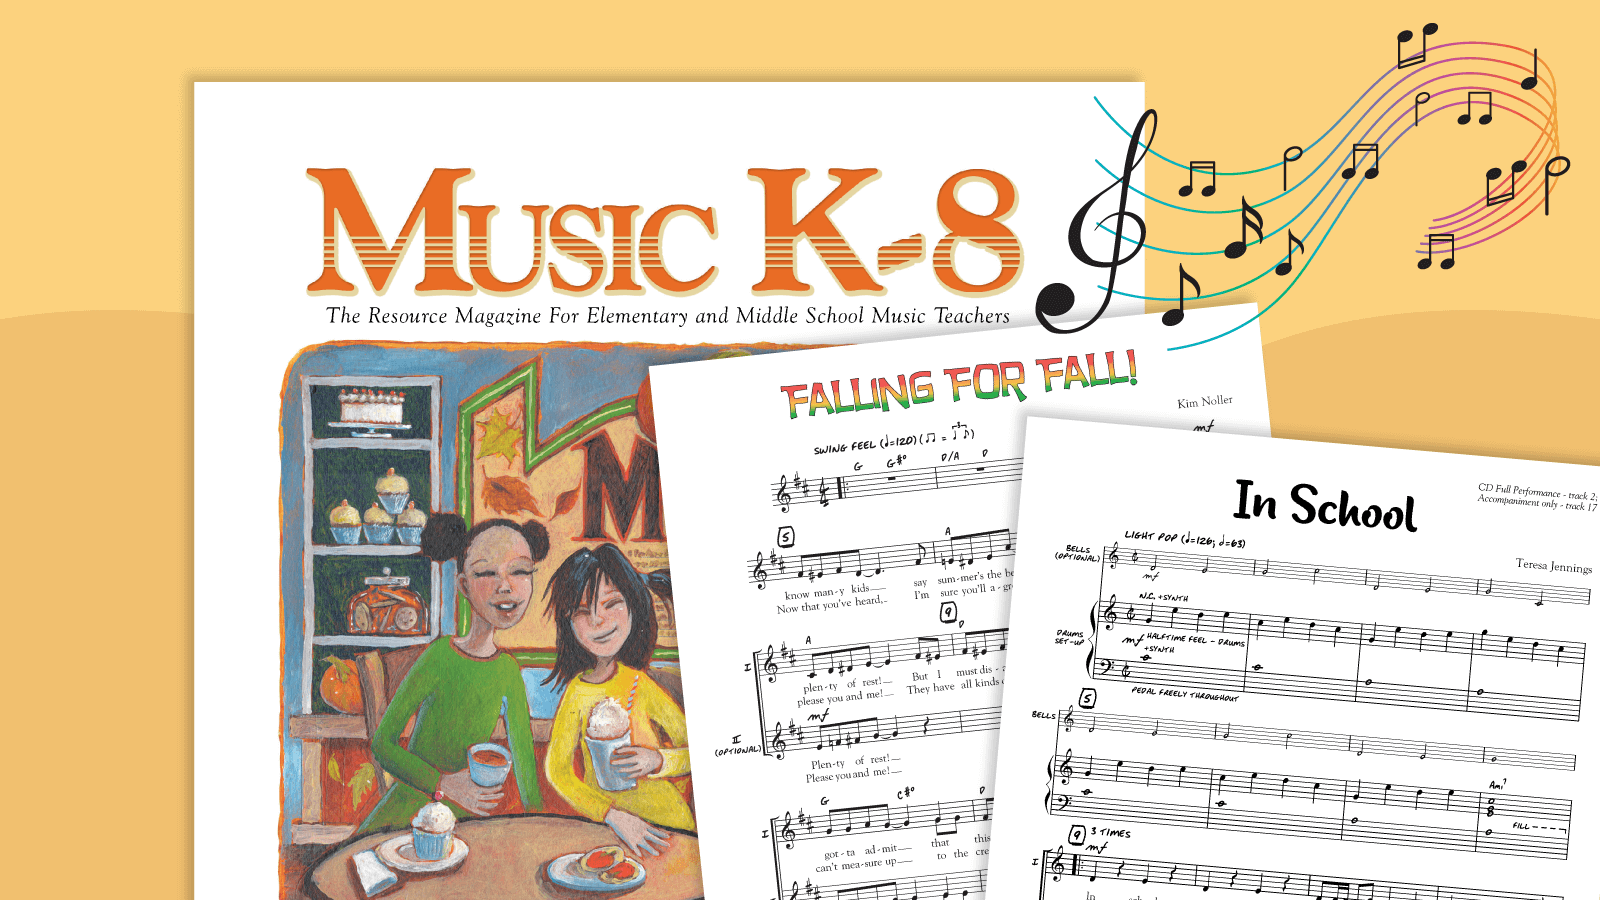 Music teachers resources - Plank Road and Music K-8